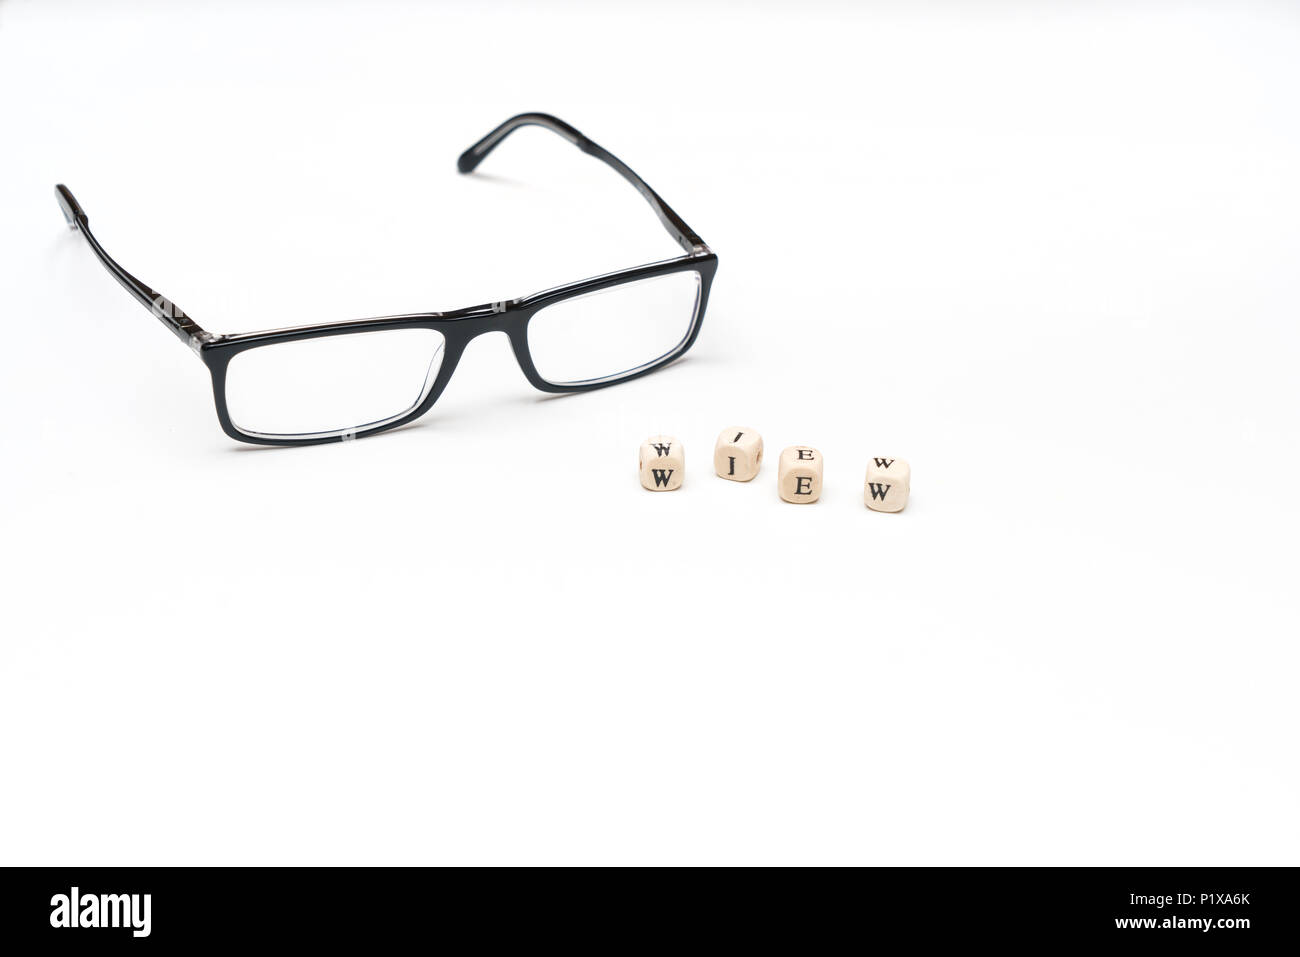 the word view and a pair of glasses on a white surface Stock Photo